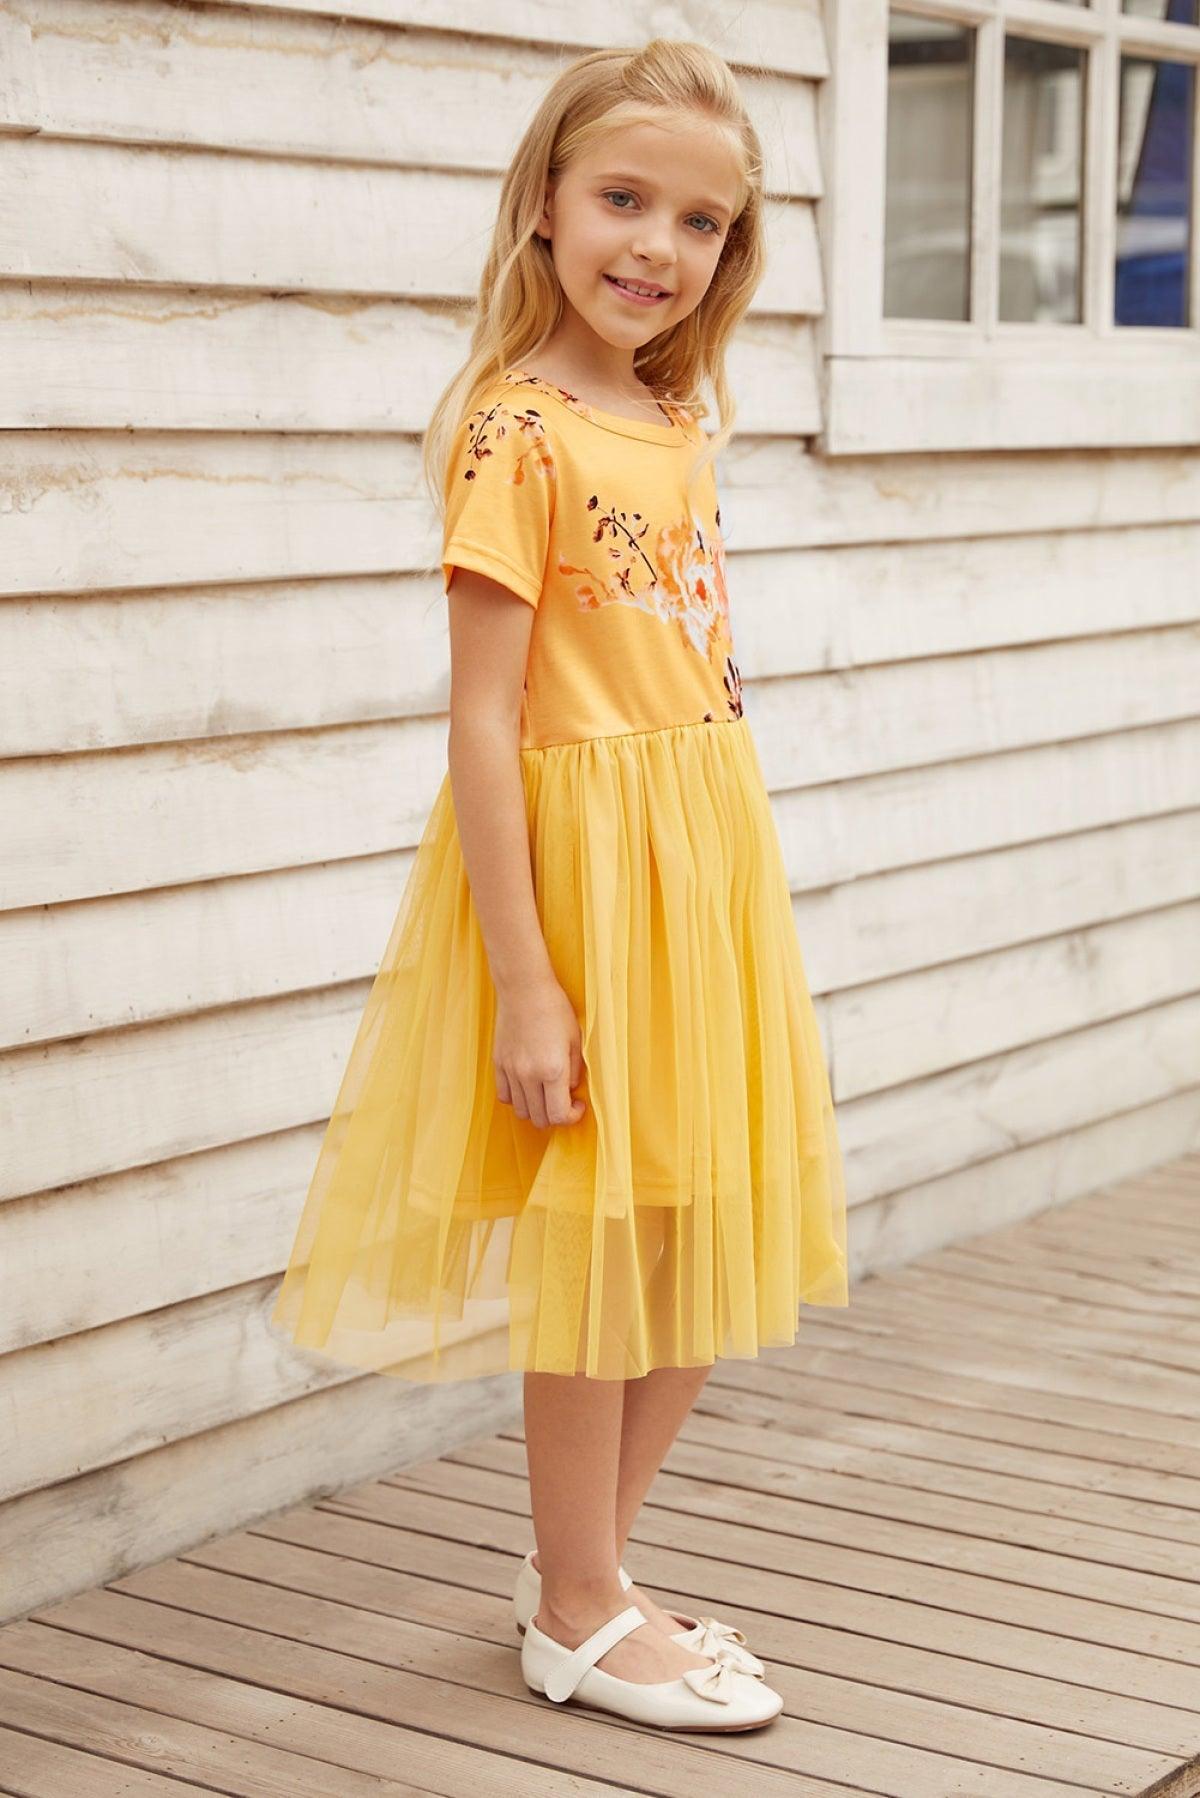 Short Sleeves Floral Bodice Empire Waist Kids' Tulle Dress - That’s So Fletch Boutique 